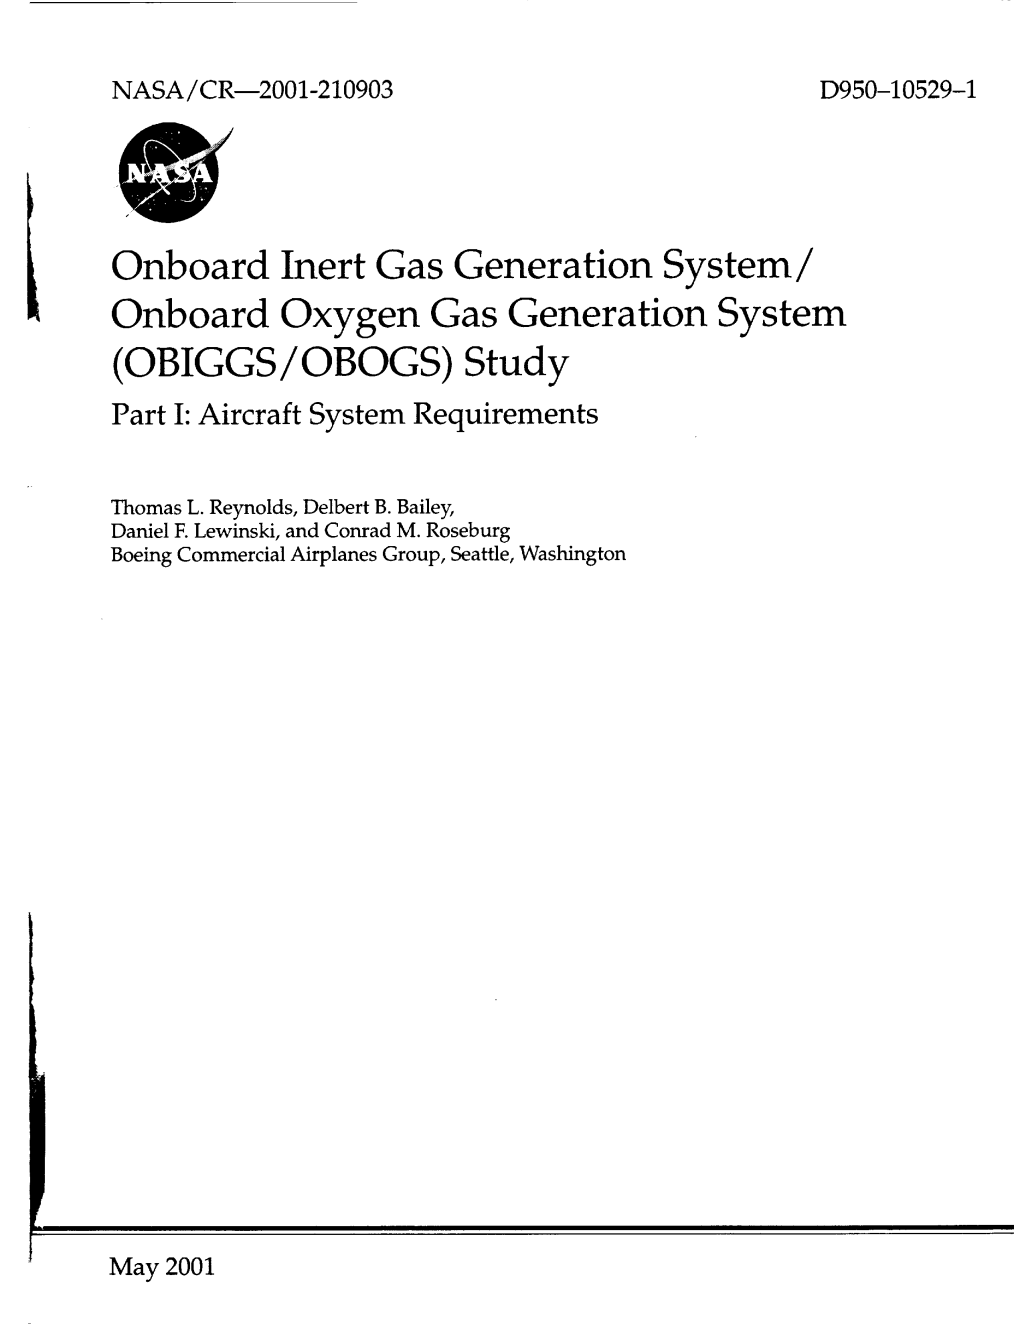 Onboard Oxygen Gas Generation System (OBIGGS/OBOGS) Study Part I: Aircraft System Requirements